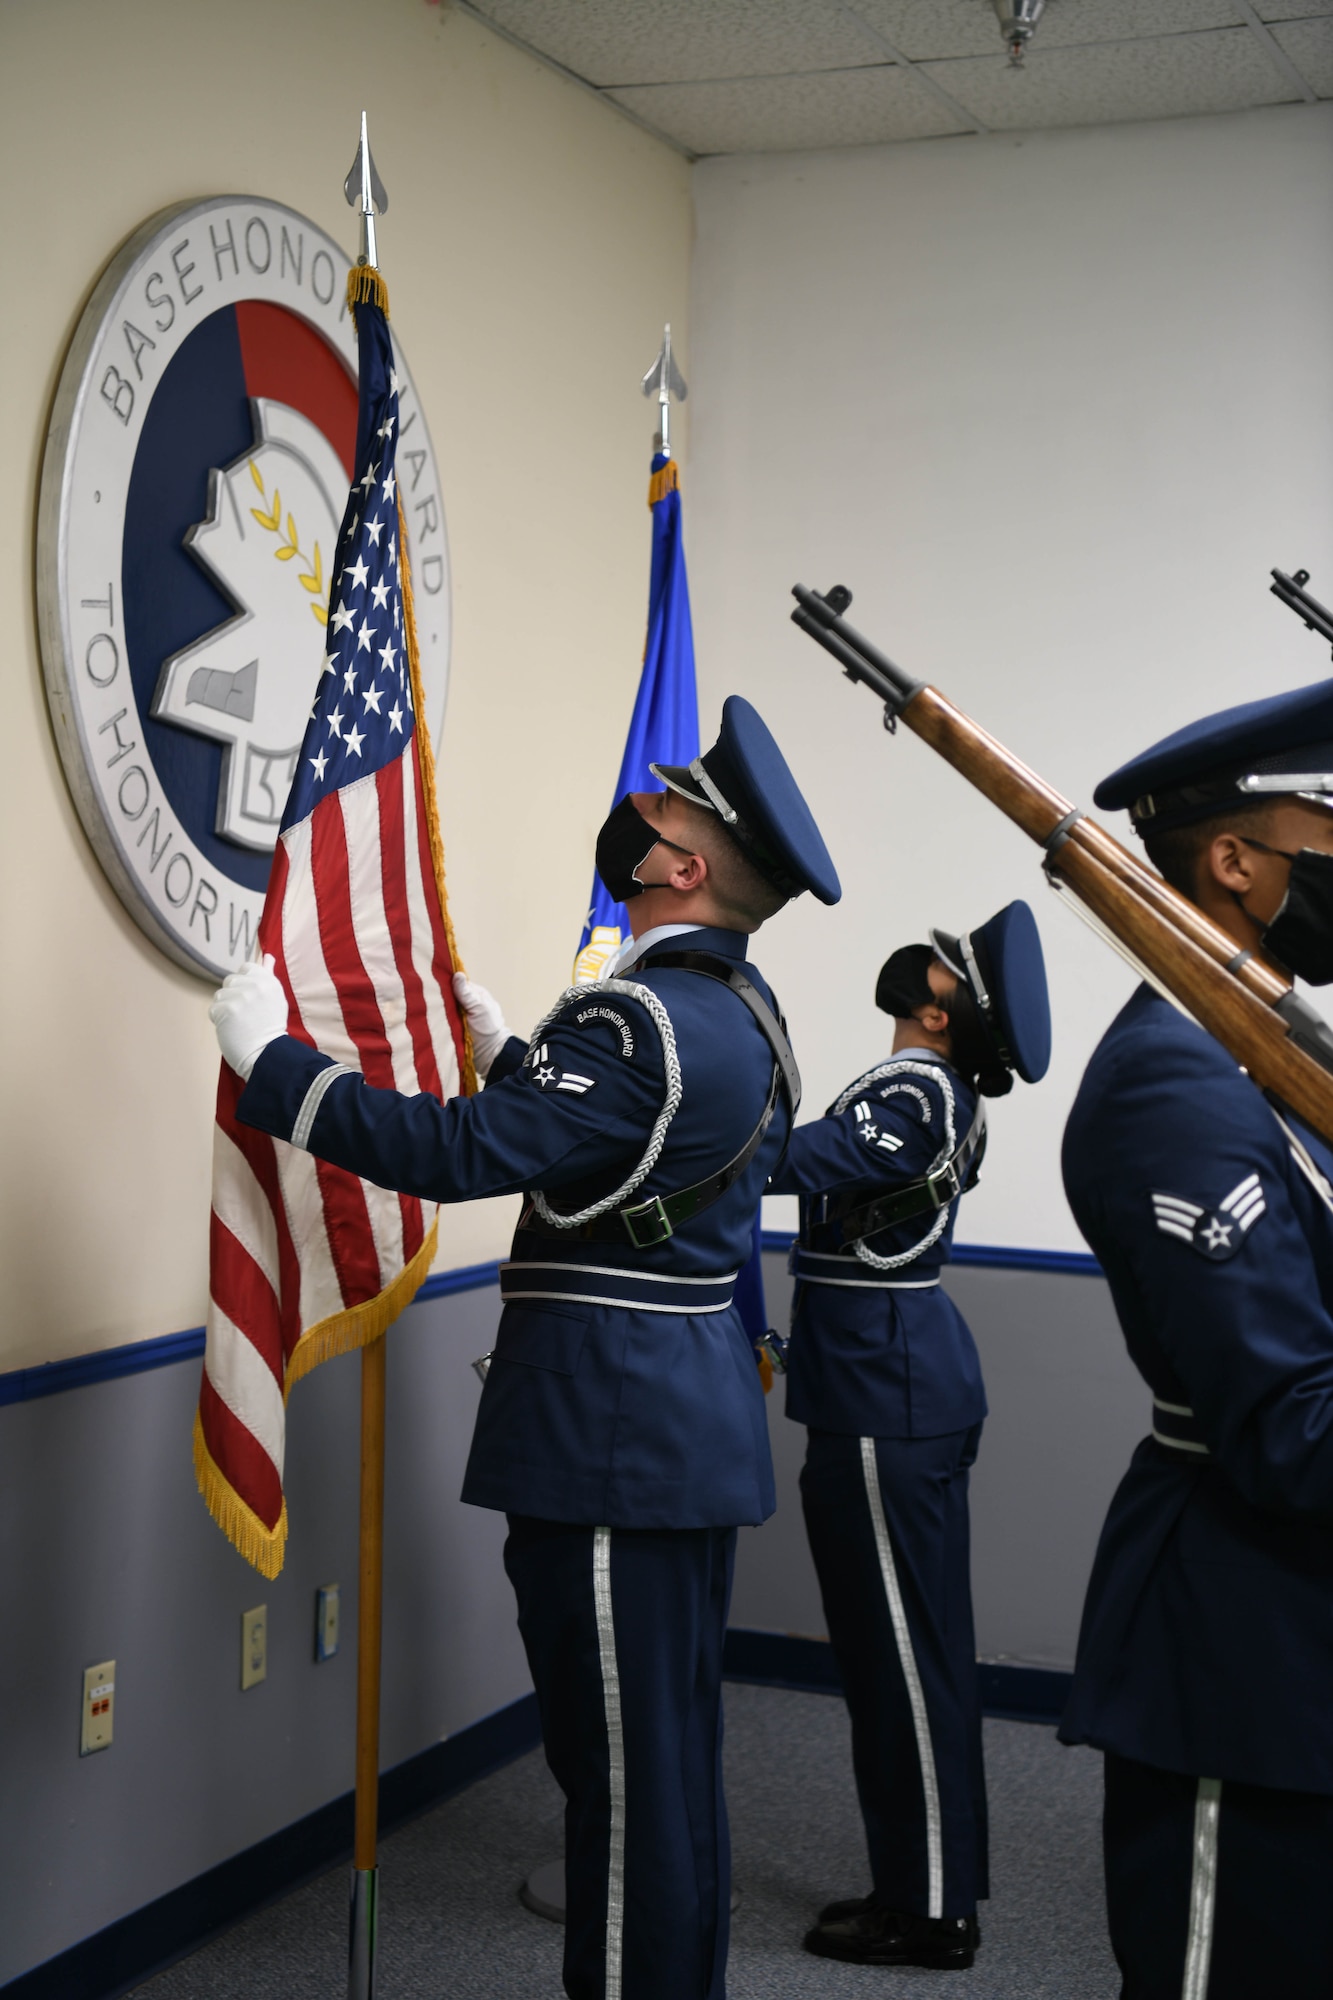 Photo shows two members of the Honor Guard placing the U.S. flag and Air Force flag in stanchions.